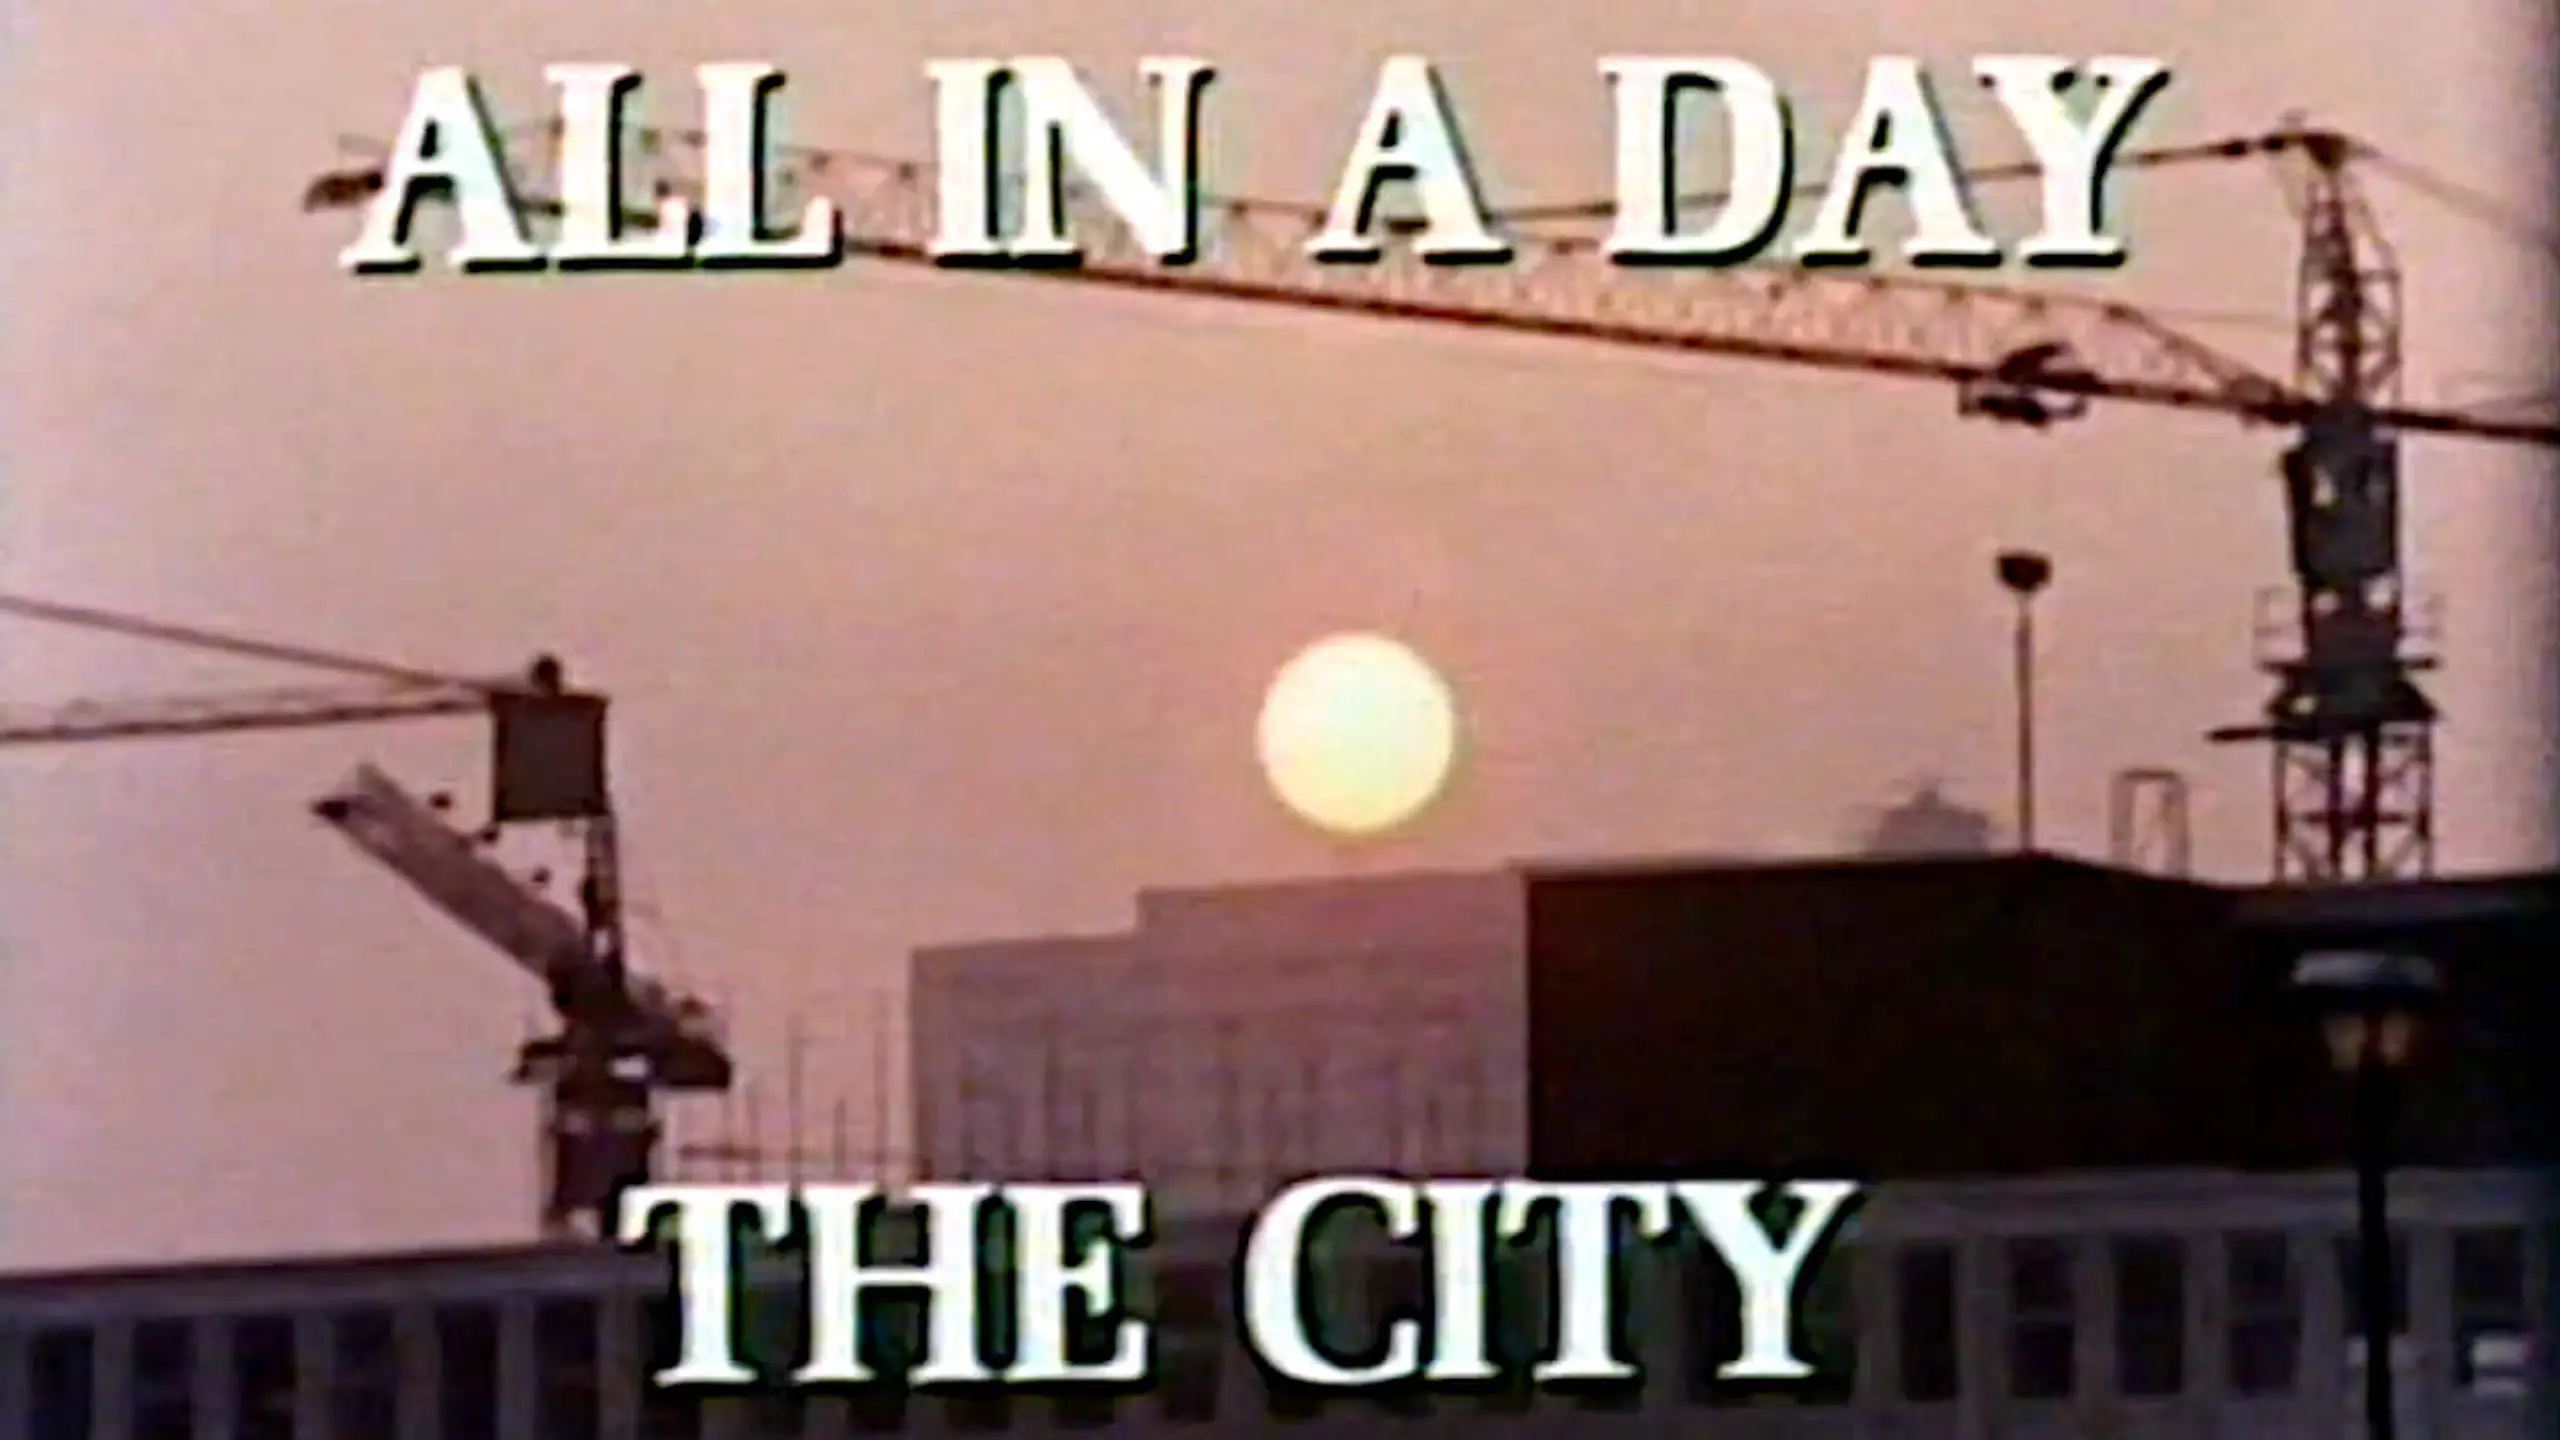 All in a Day: The City